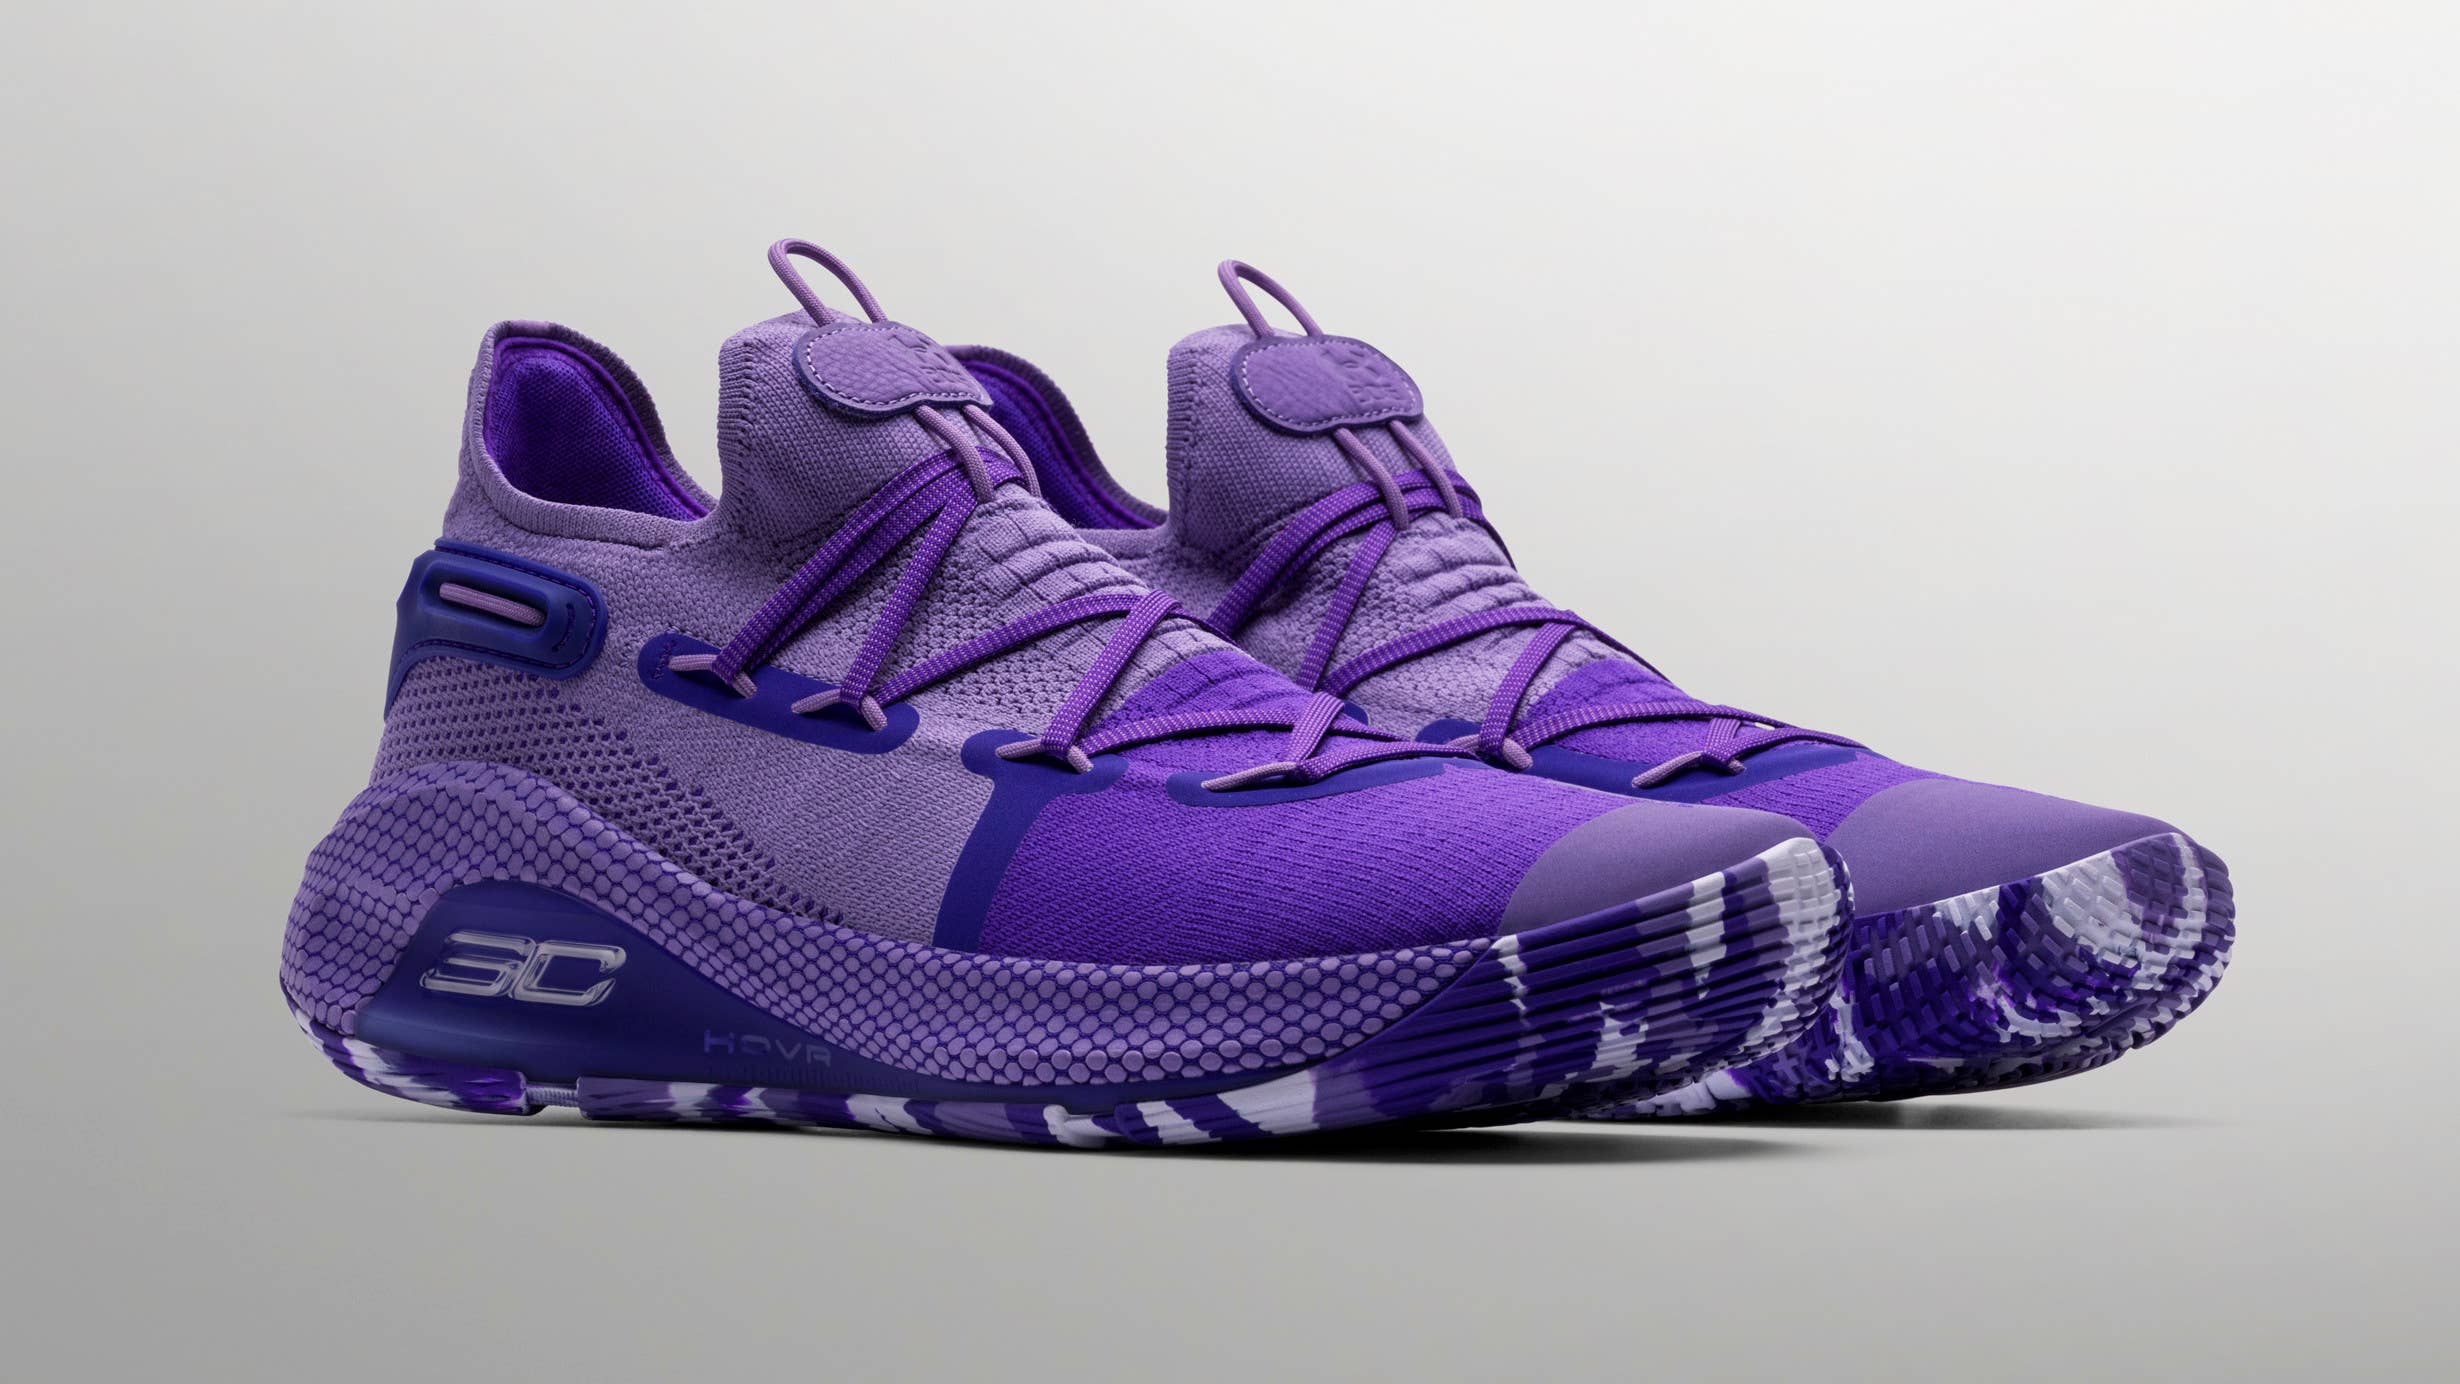 What Pros Wear: Steph Curry's Under Armour Curry 6 Shoes - What Pros Wear